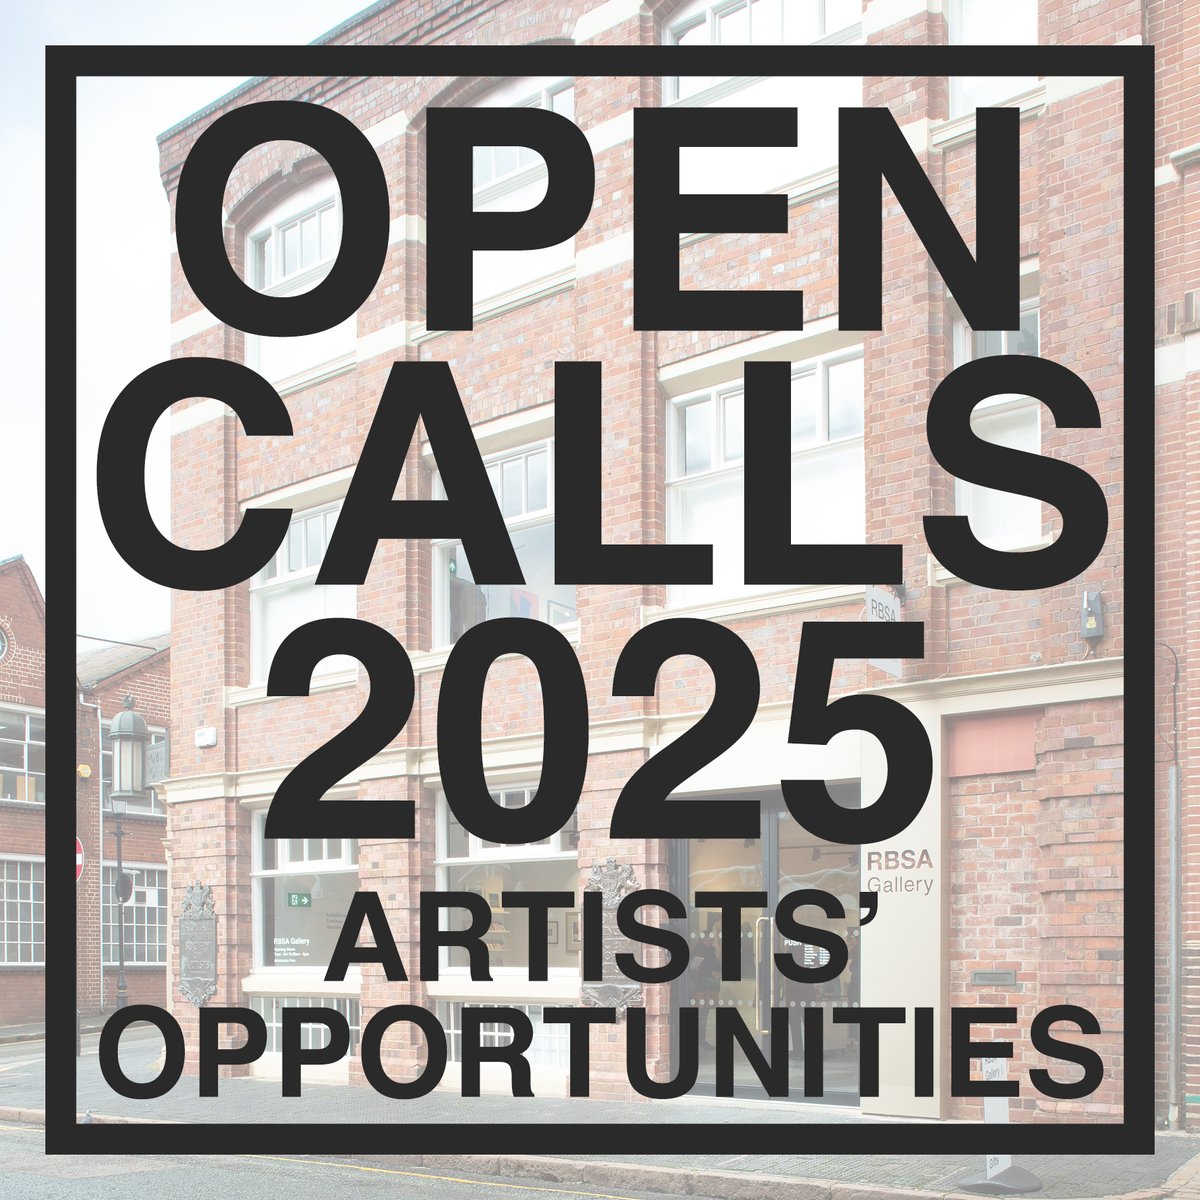 Announcing our open call exhibitions for 2025! Calls open 3 months prior to exhibitions. Friends Exhibition, 9 Jan - 8 Feb Photography Prize, 27 Feb - 5 Apr Drawing Prize, 29 May - 28 June Summer Show, 3 July - 2 Aug Watercolour Prize, 7 Aug - 13 Sept #callforentries